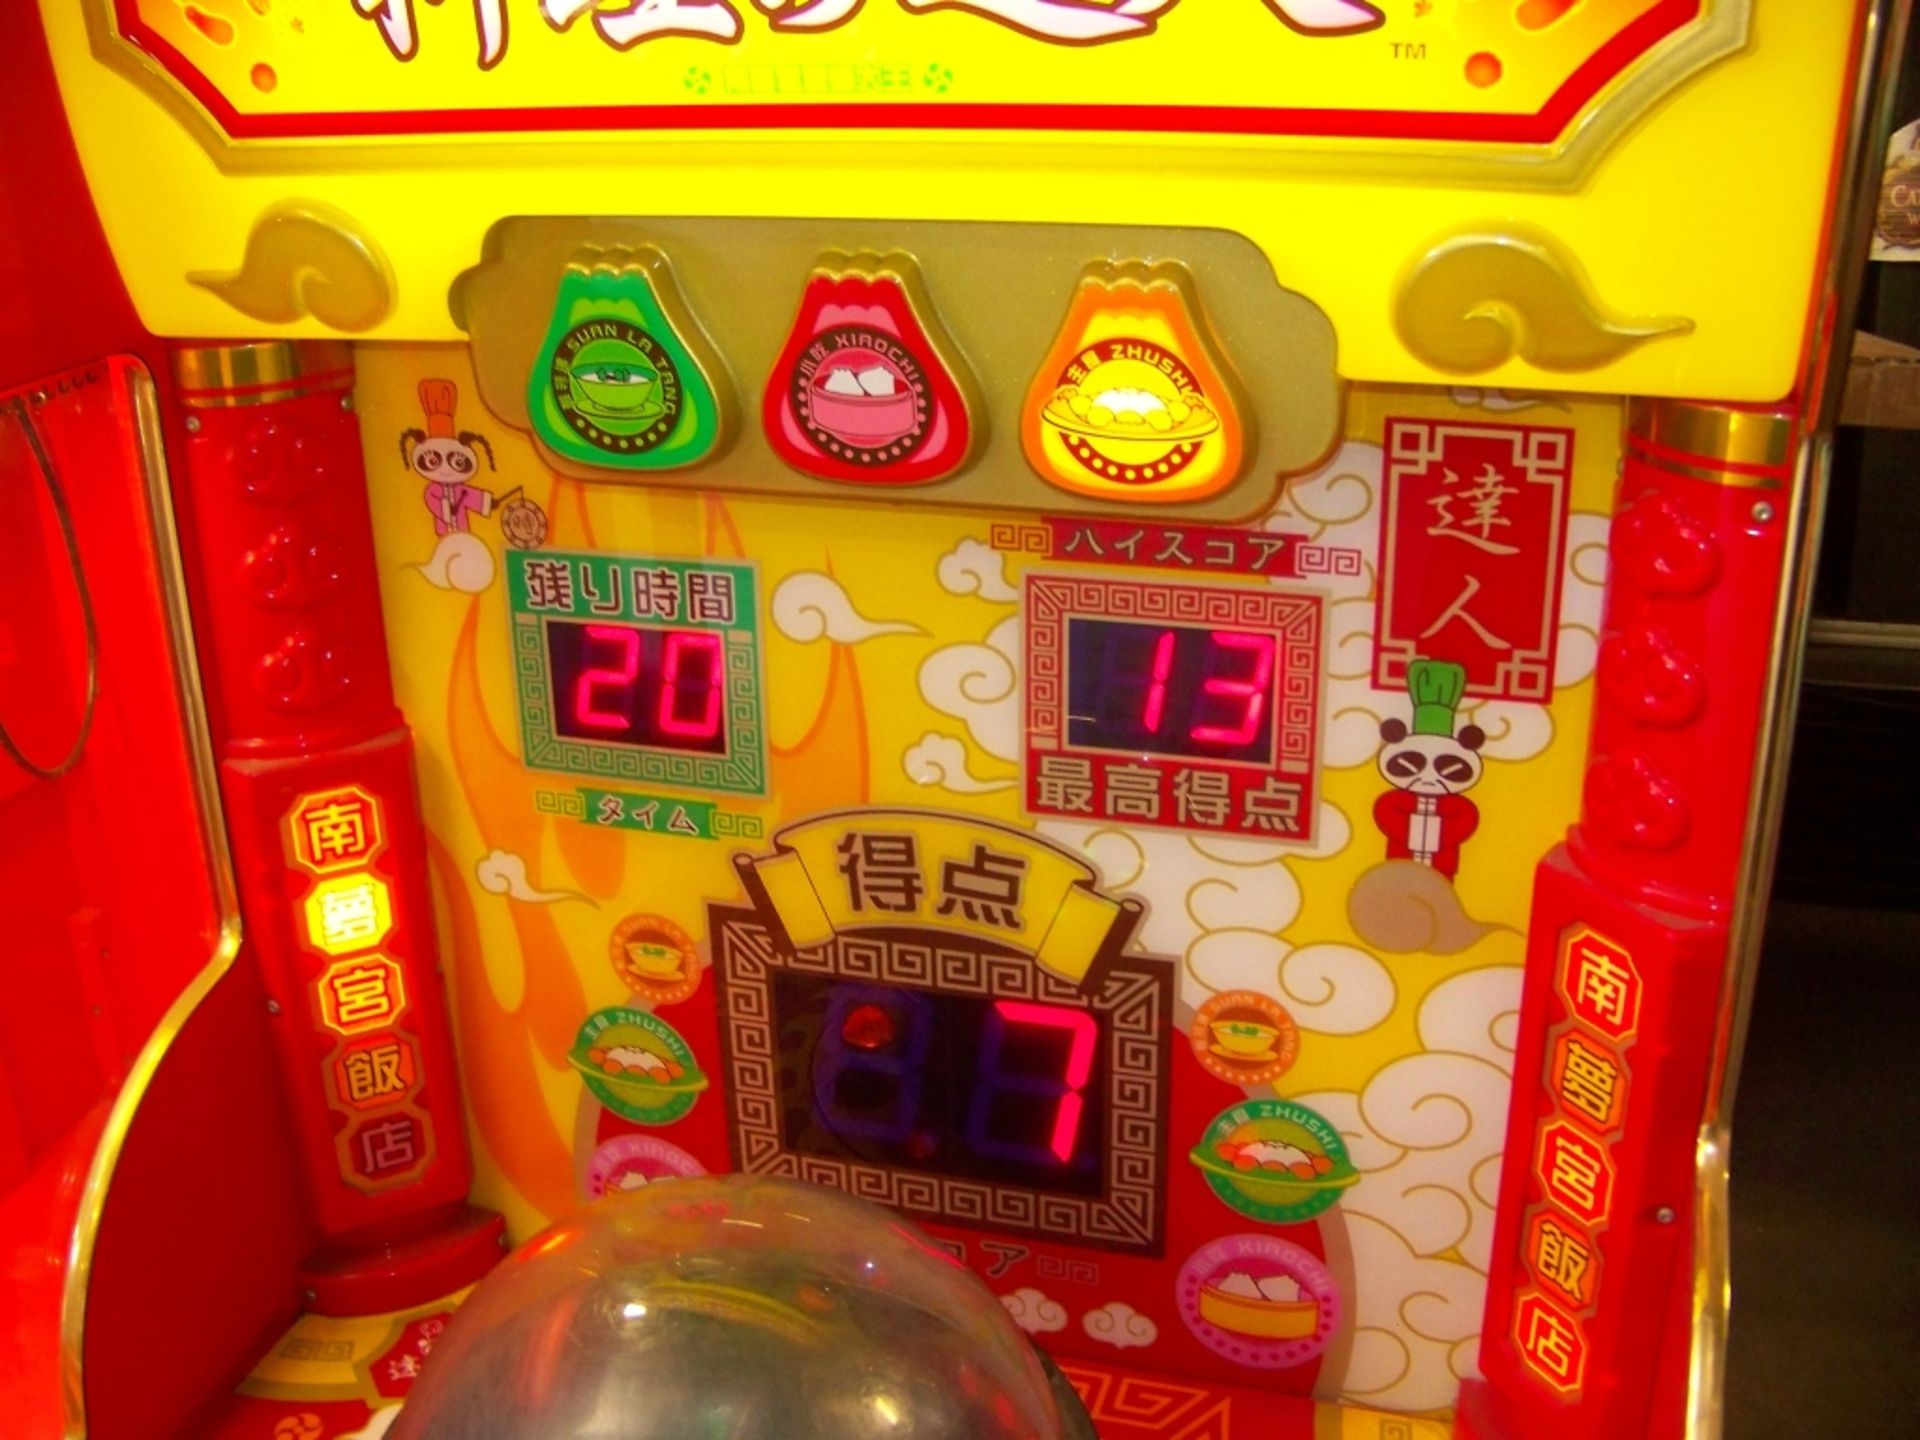 MASTER CHEF PRIZE REDEMPTION ARCADE GAME NAMCO Item is in used condition. Evidence of wear and - Image 7 of 8